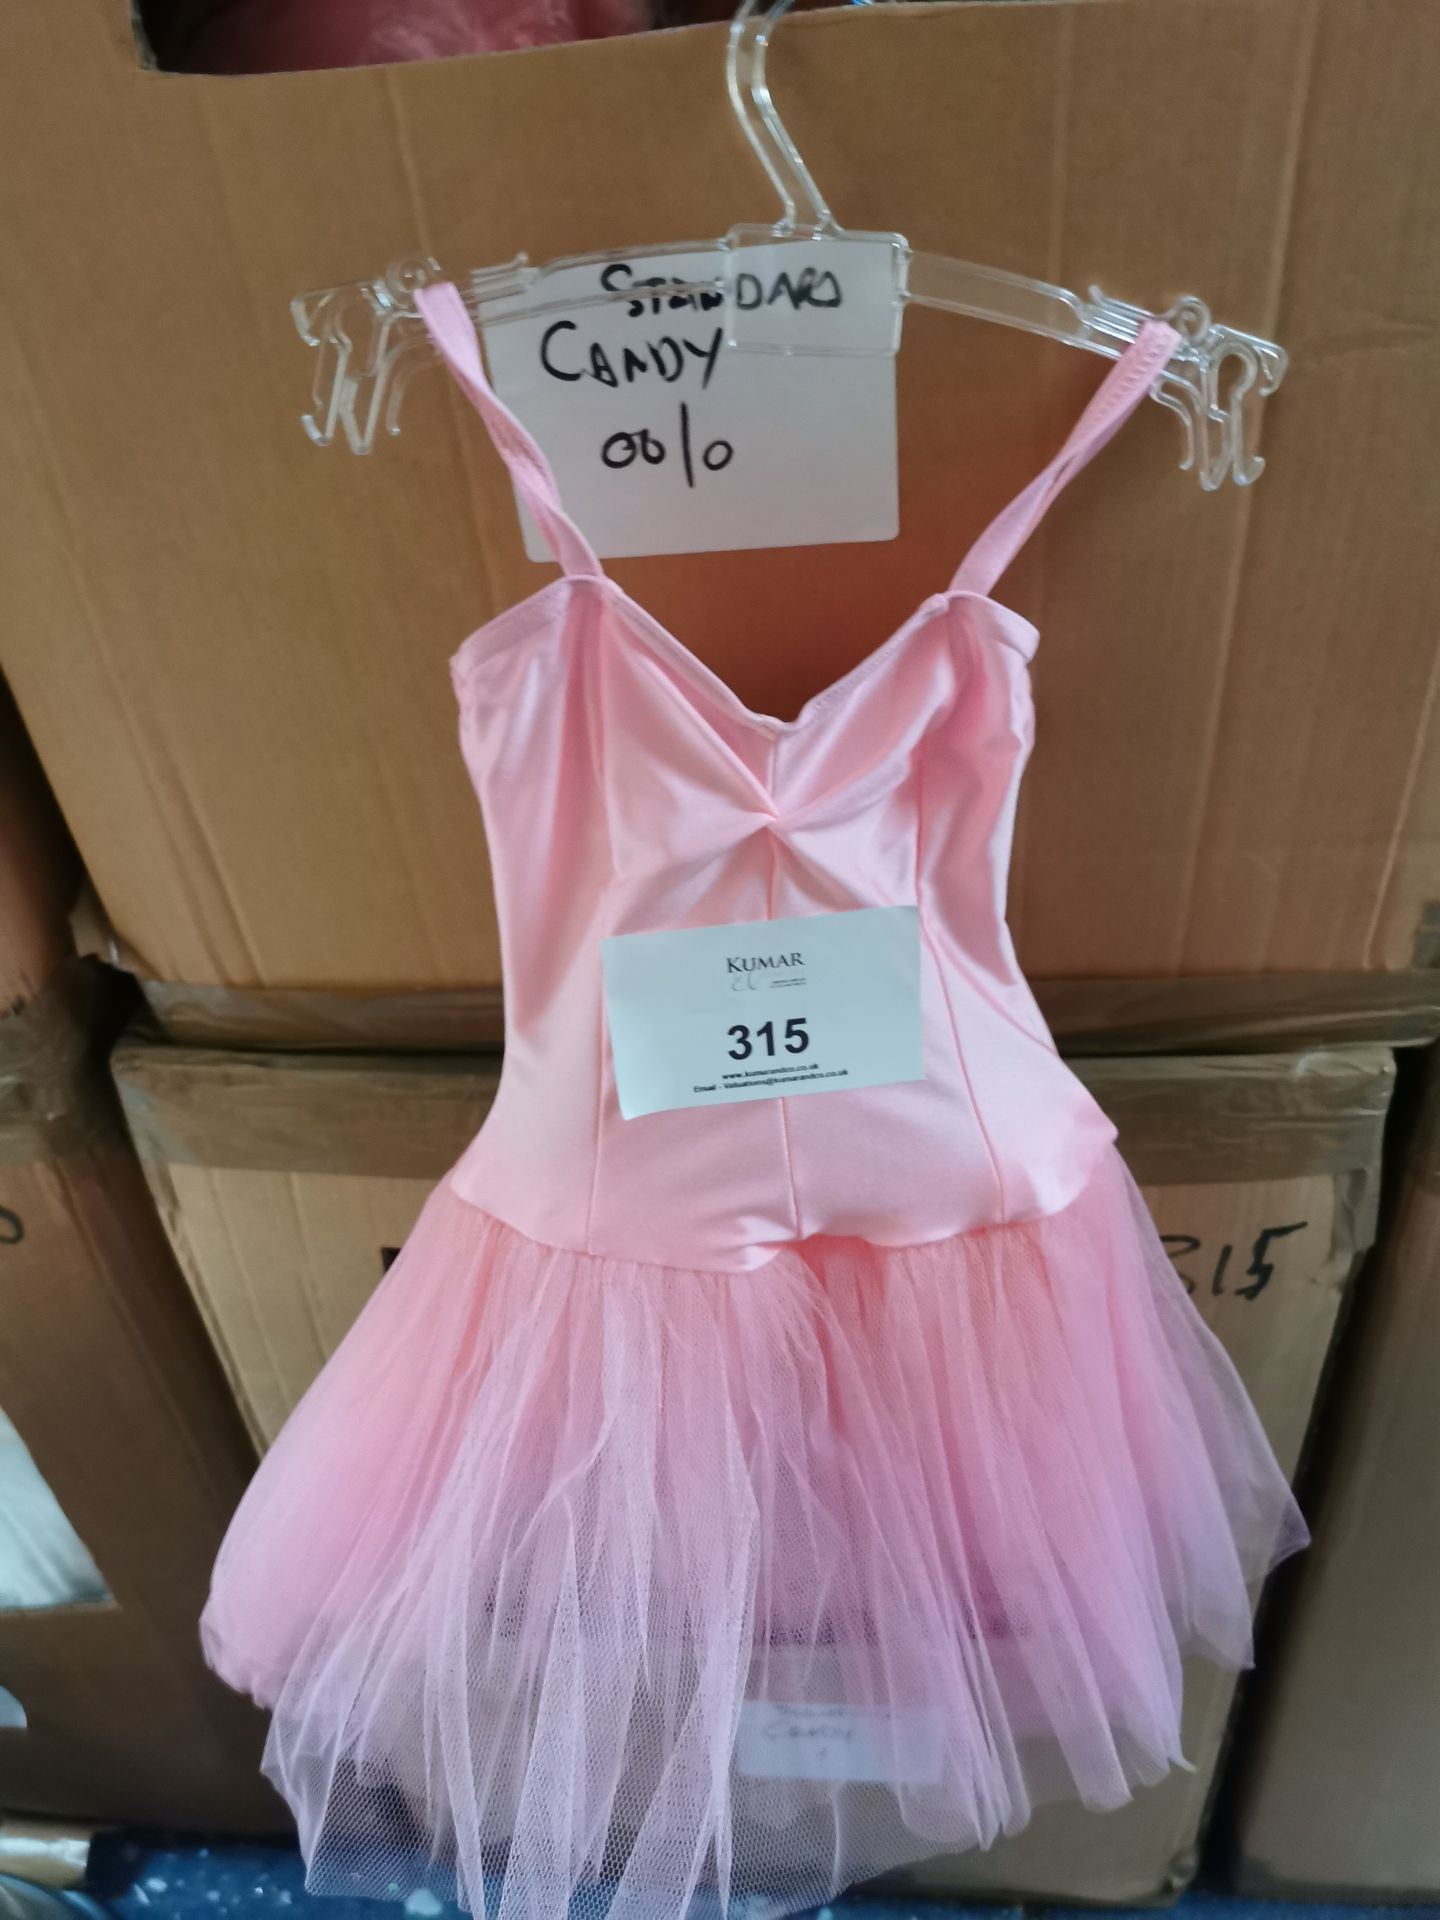 40+ Estimated standard candy dresses in sizes 00-1 - Image 2 of 3